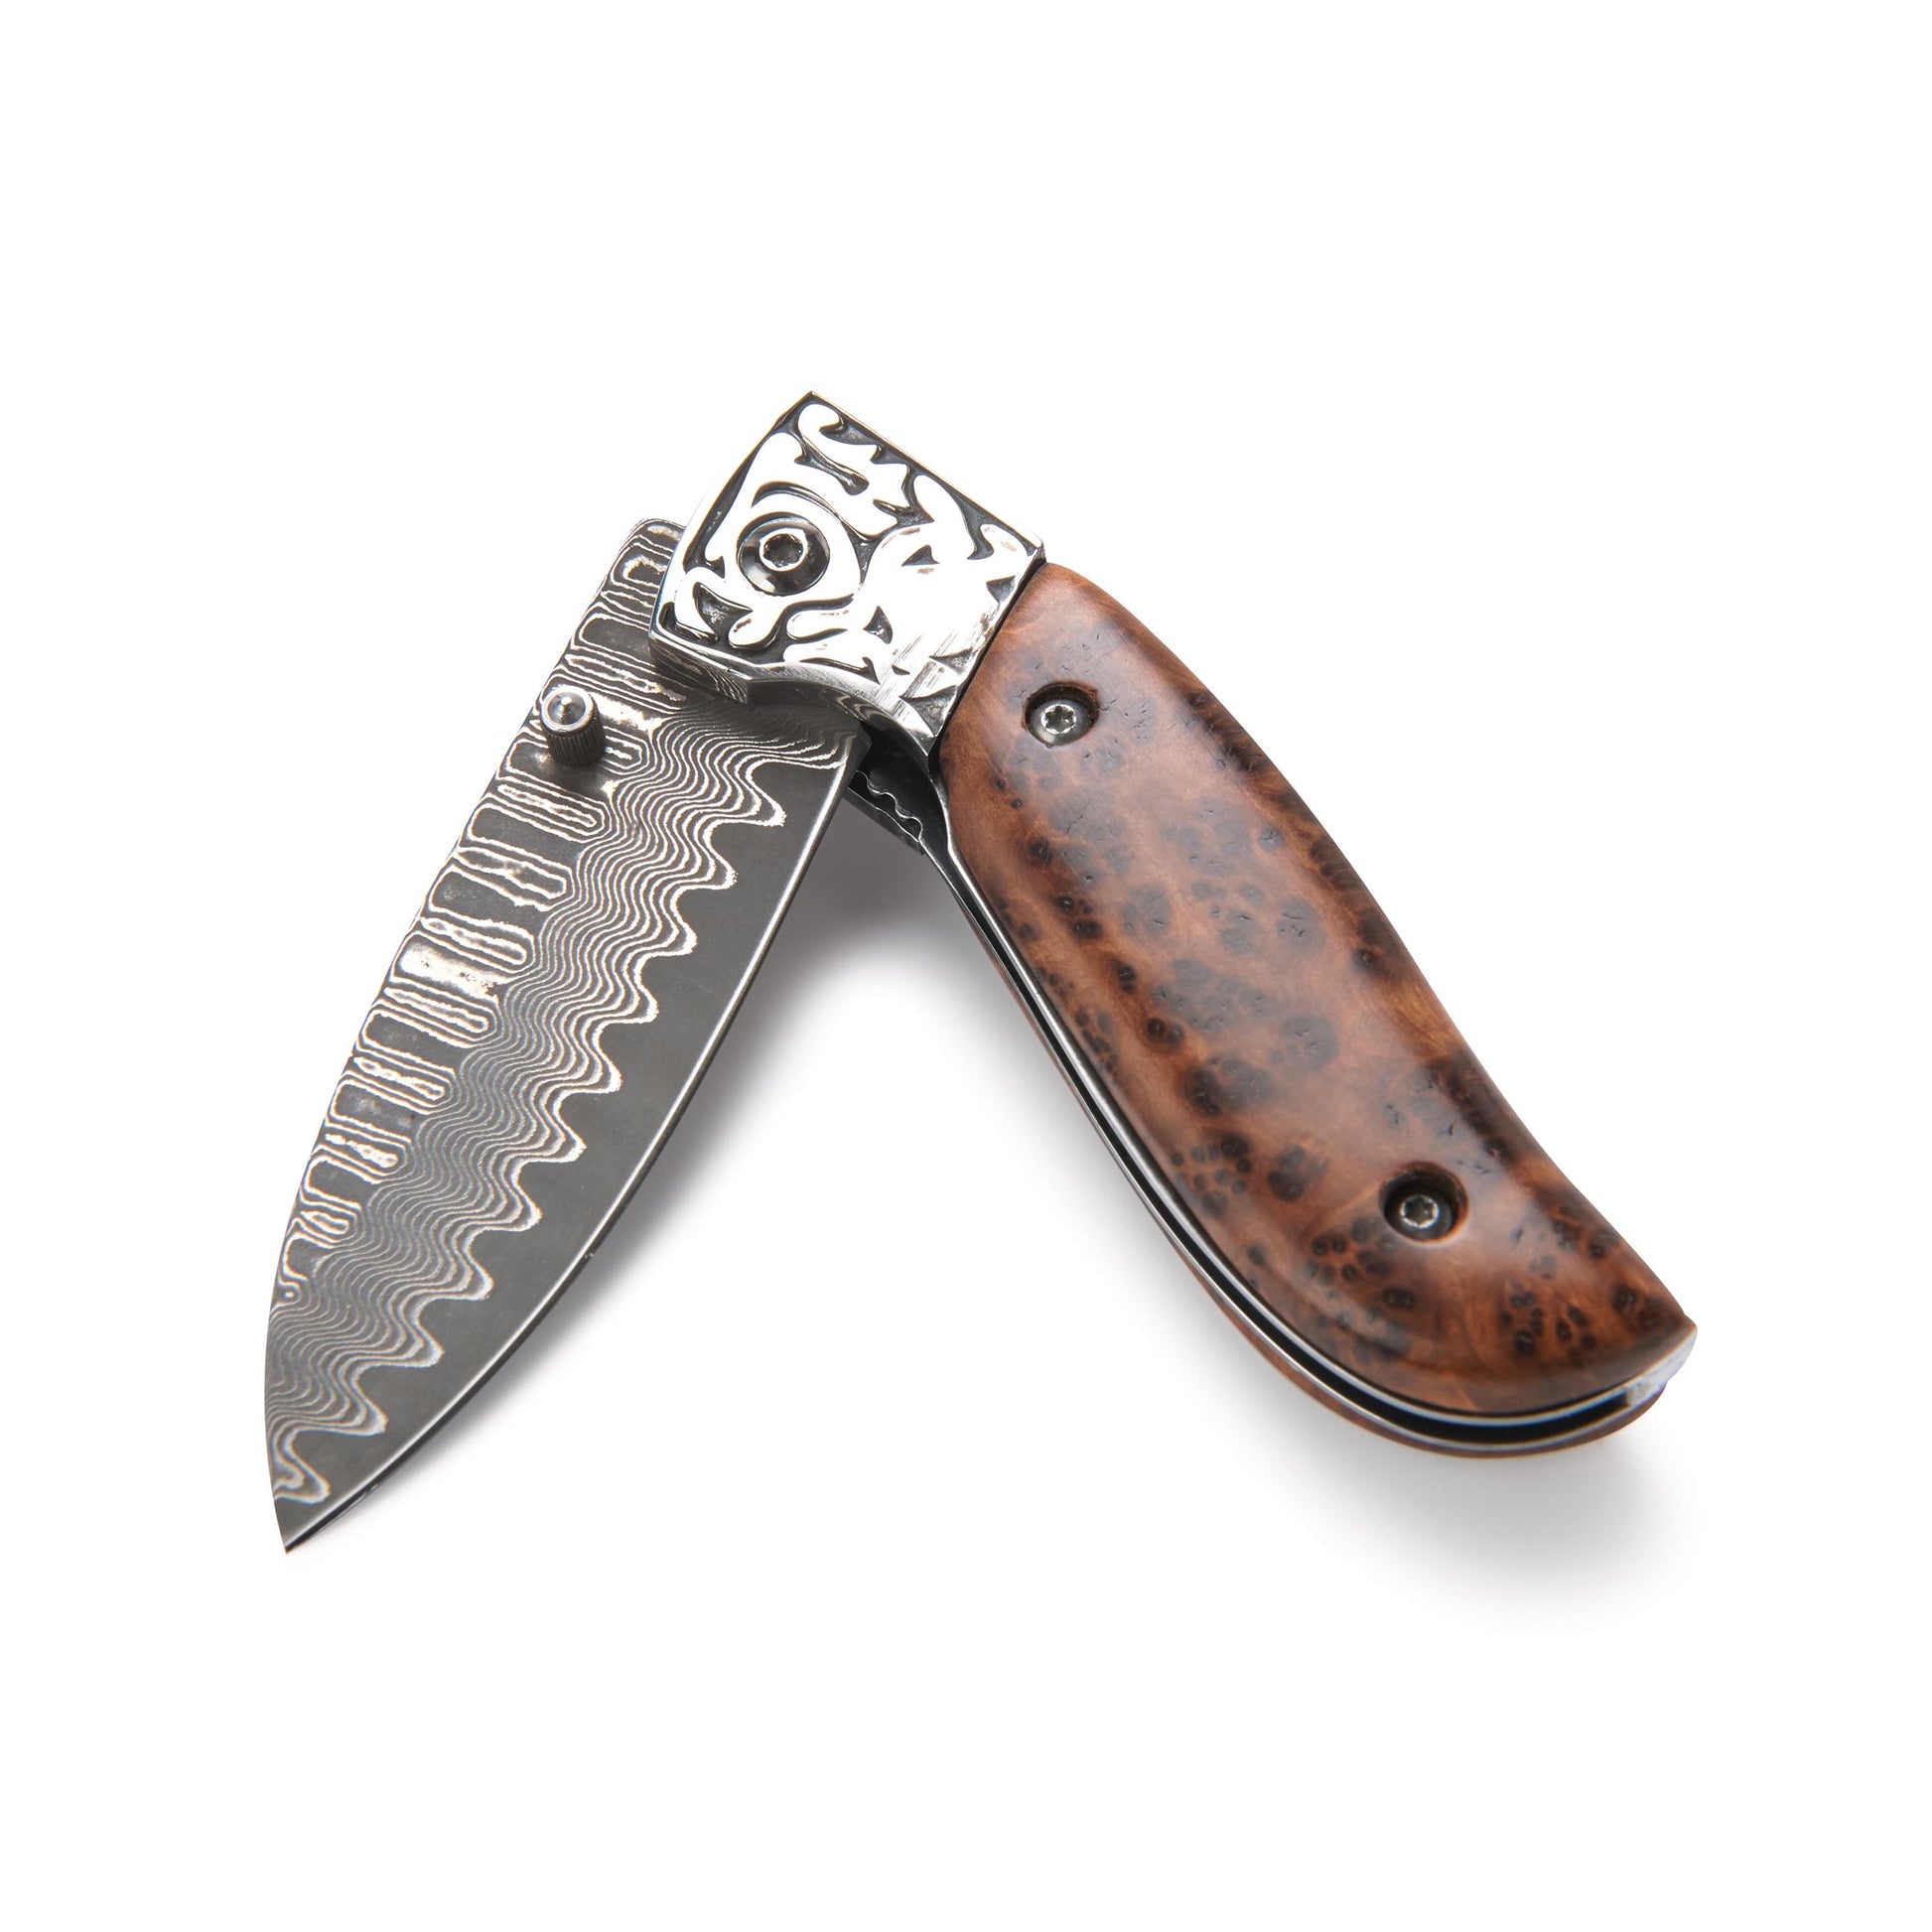 Sarge Fox 93 Pocketknife for Hunting and Fishing - 6 - Damascus - Unfinished  Kit